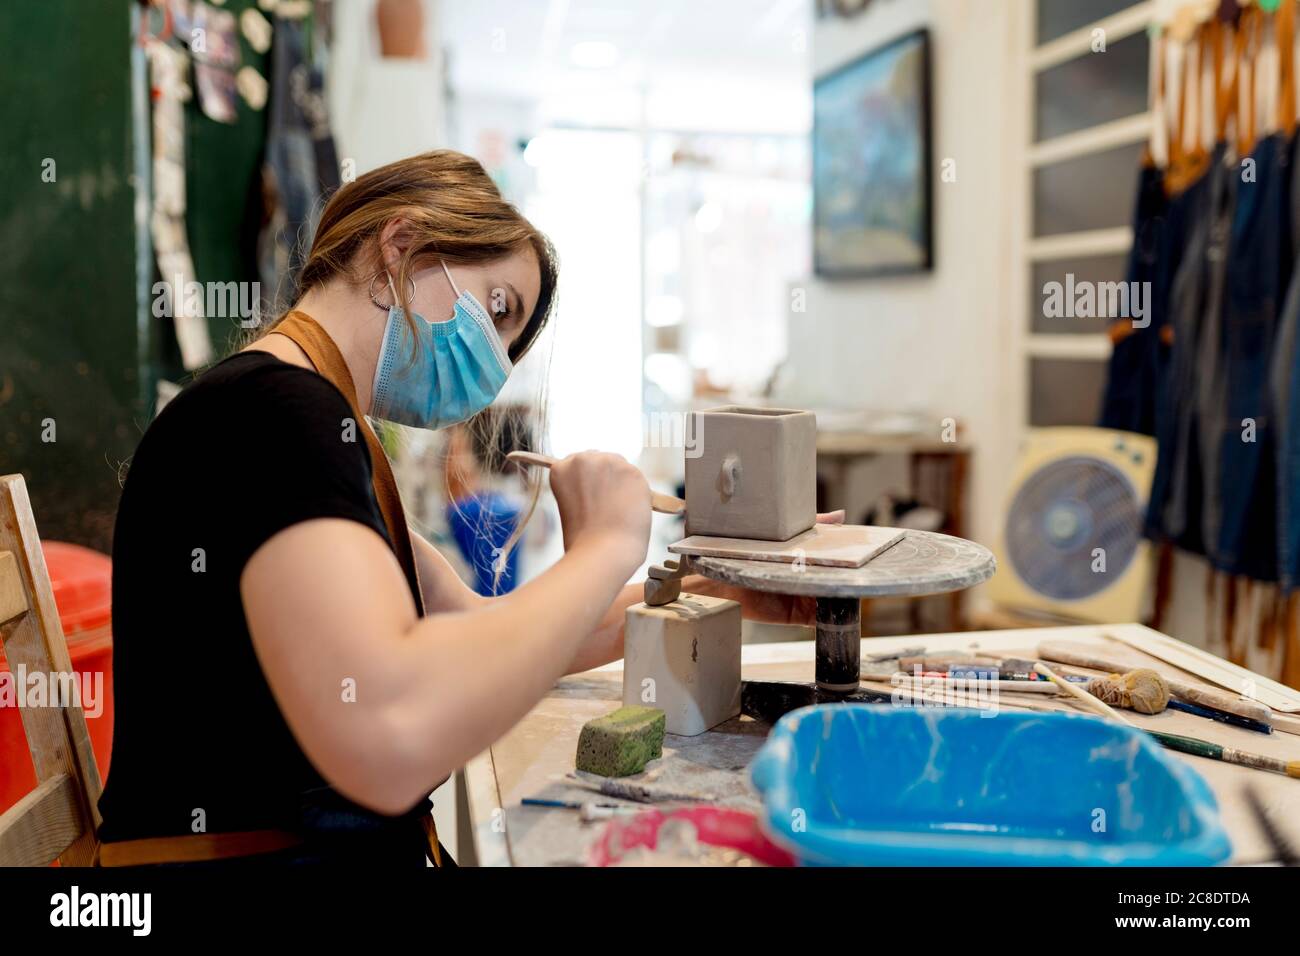 Young woman wearing mask making ceramic on workbench in workshop Stock Photo